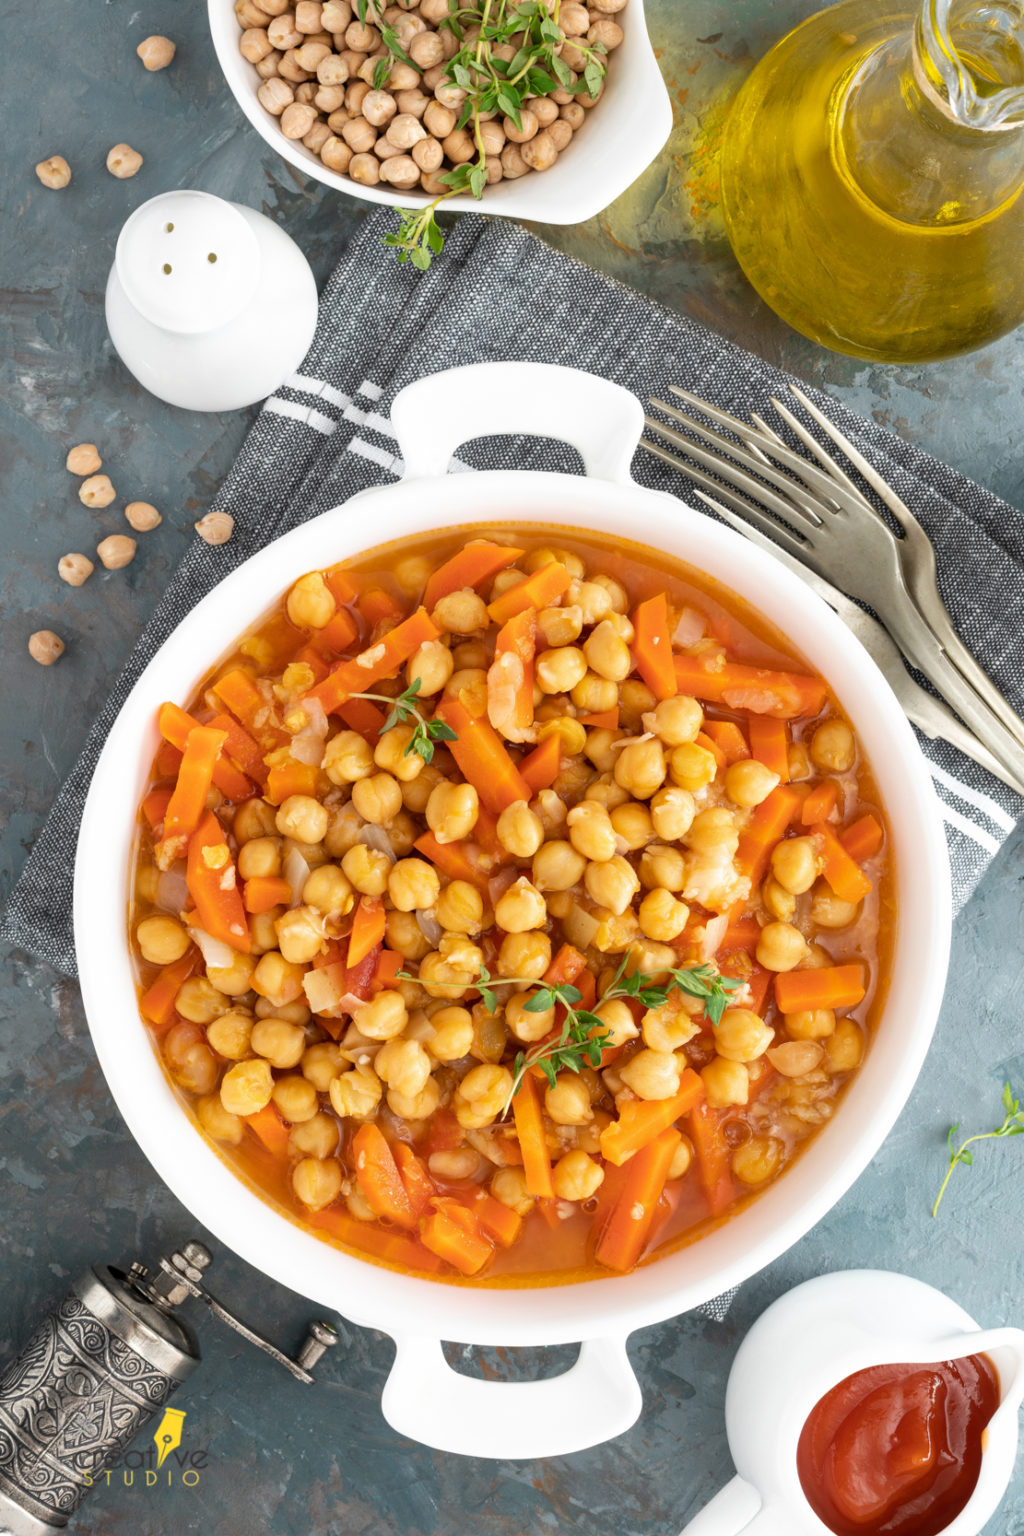 Chana Masala, spicy chickpea curry with carrot and onion in tomato sauce. Vegetarian dish for lunch. Indian cuisine